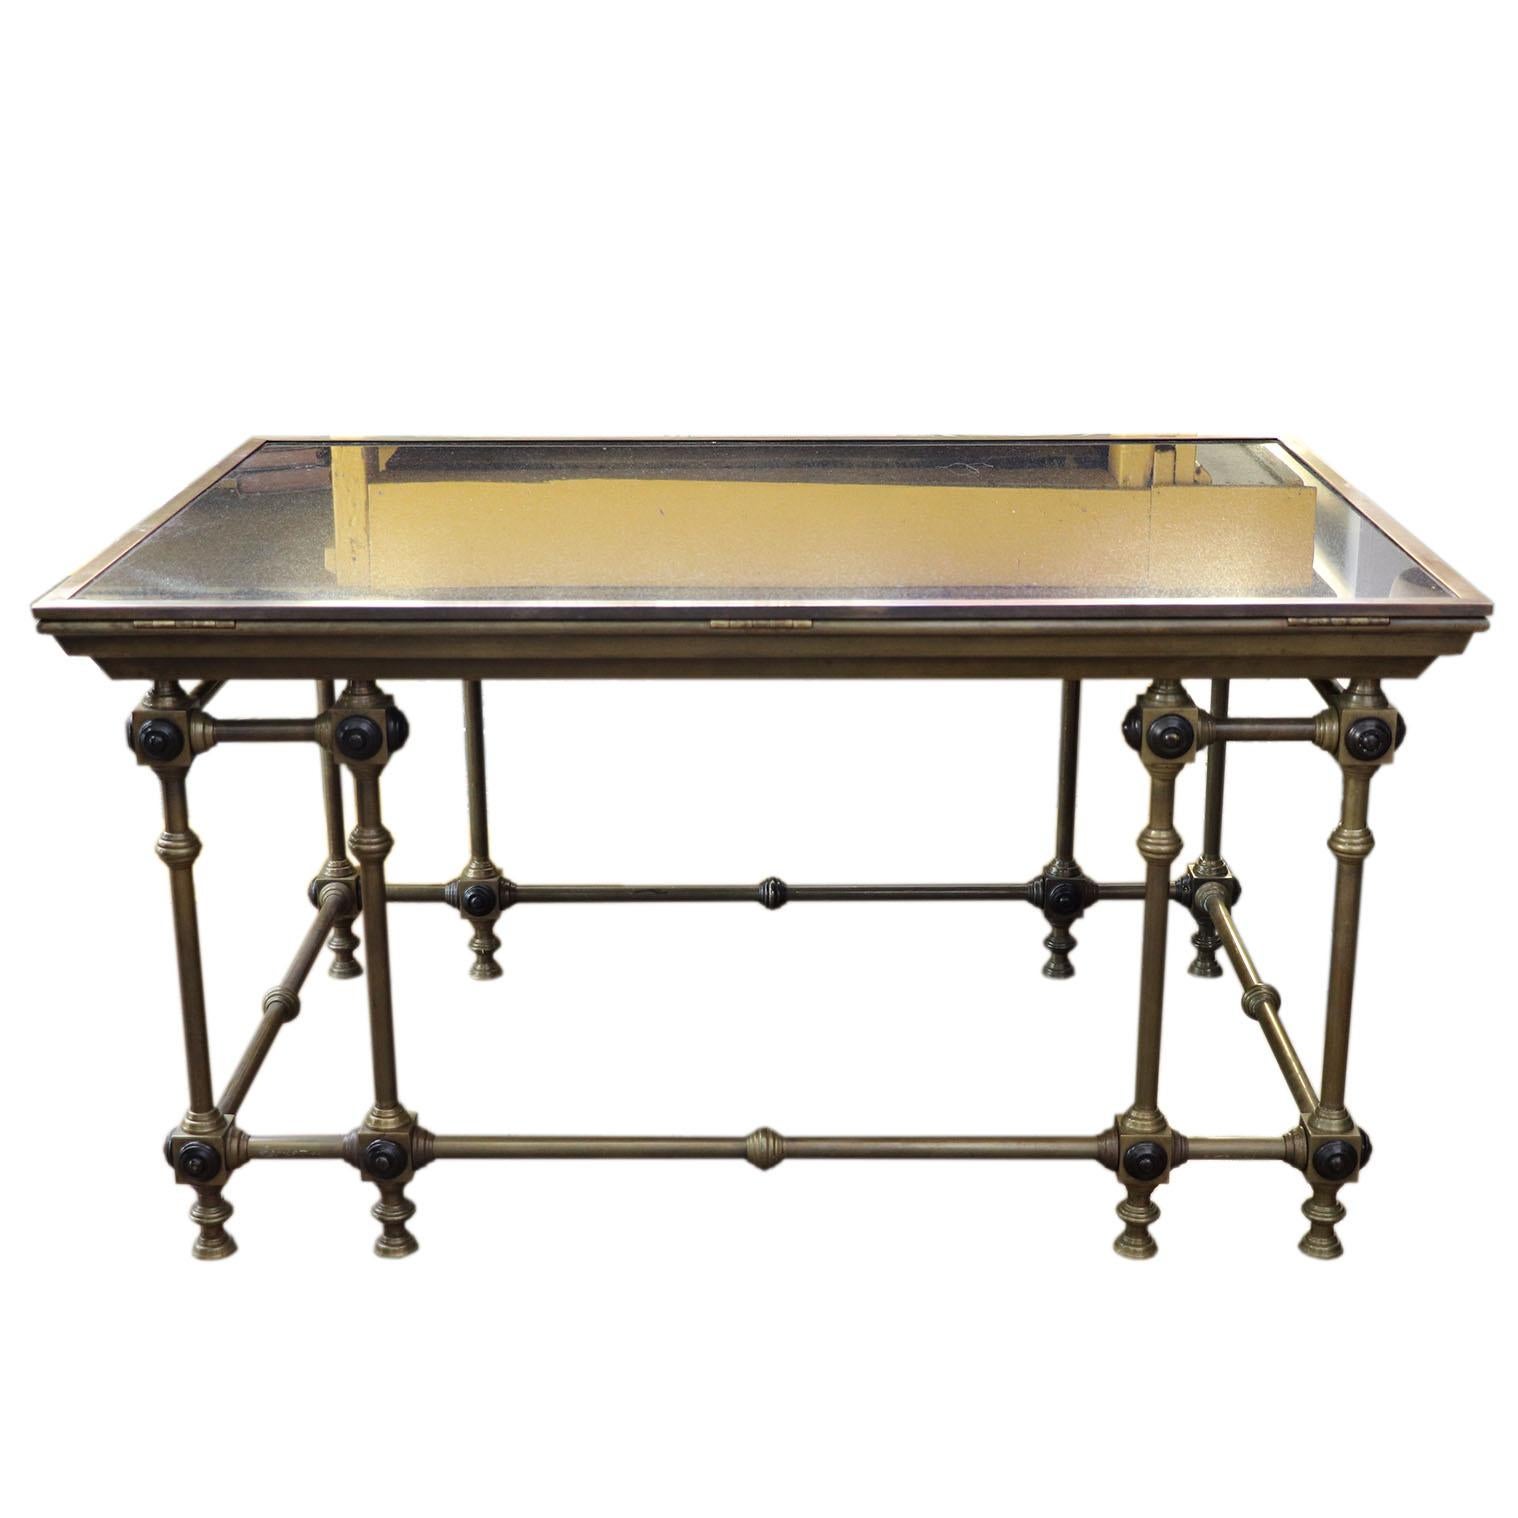 Cast your eyes upon this extraordinary work of art - a map brass frame case that has been masterfully transformed into a coffee table that is both functional and visually stunning. The map case, which has been given a new lease of life, now serves